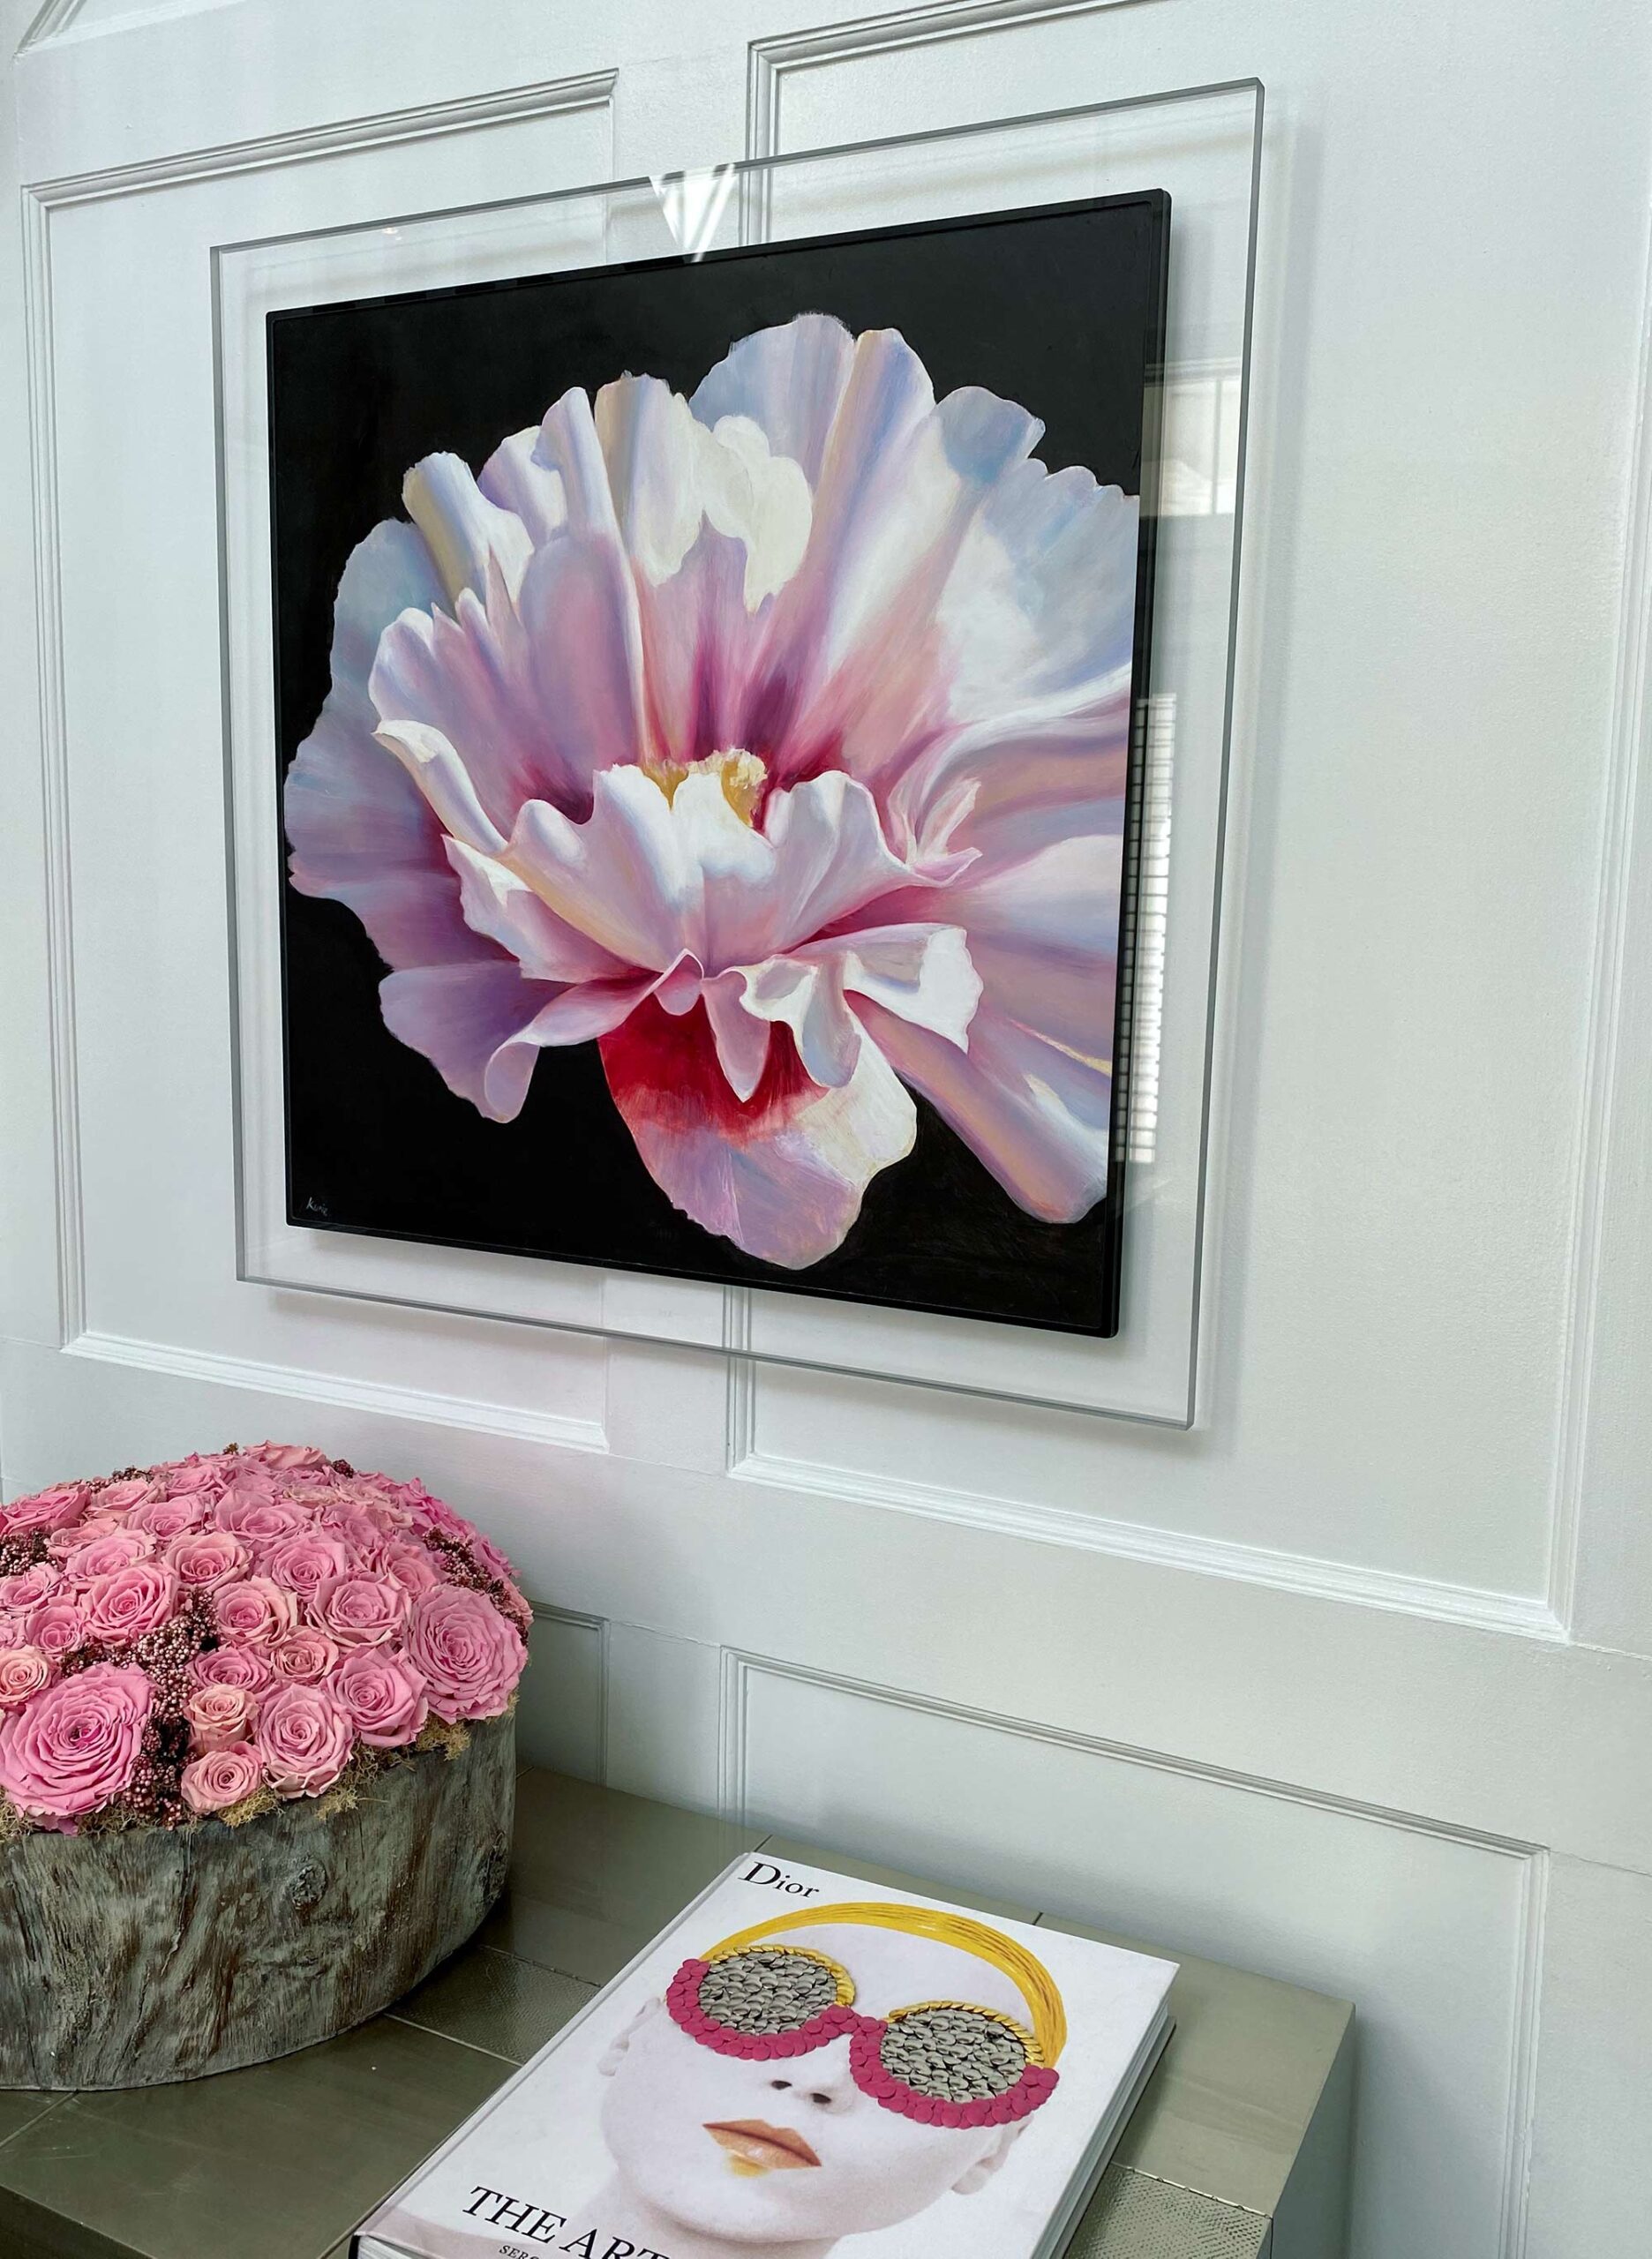 Art and Accessories selection by Kathryn Cook Interiors